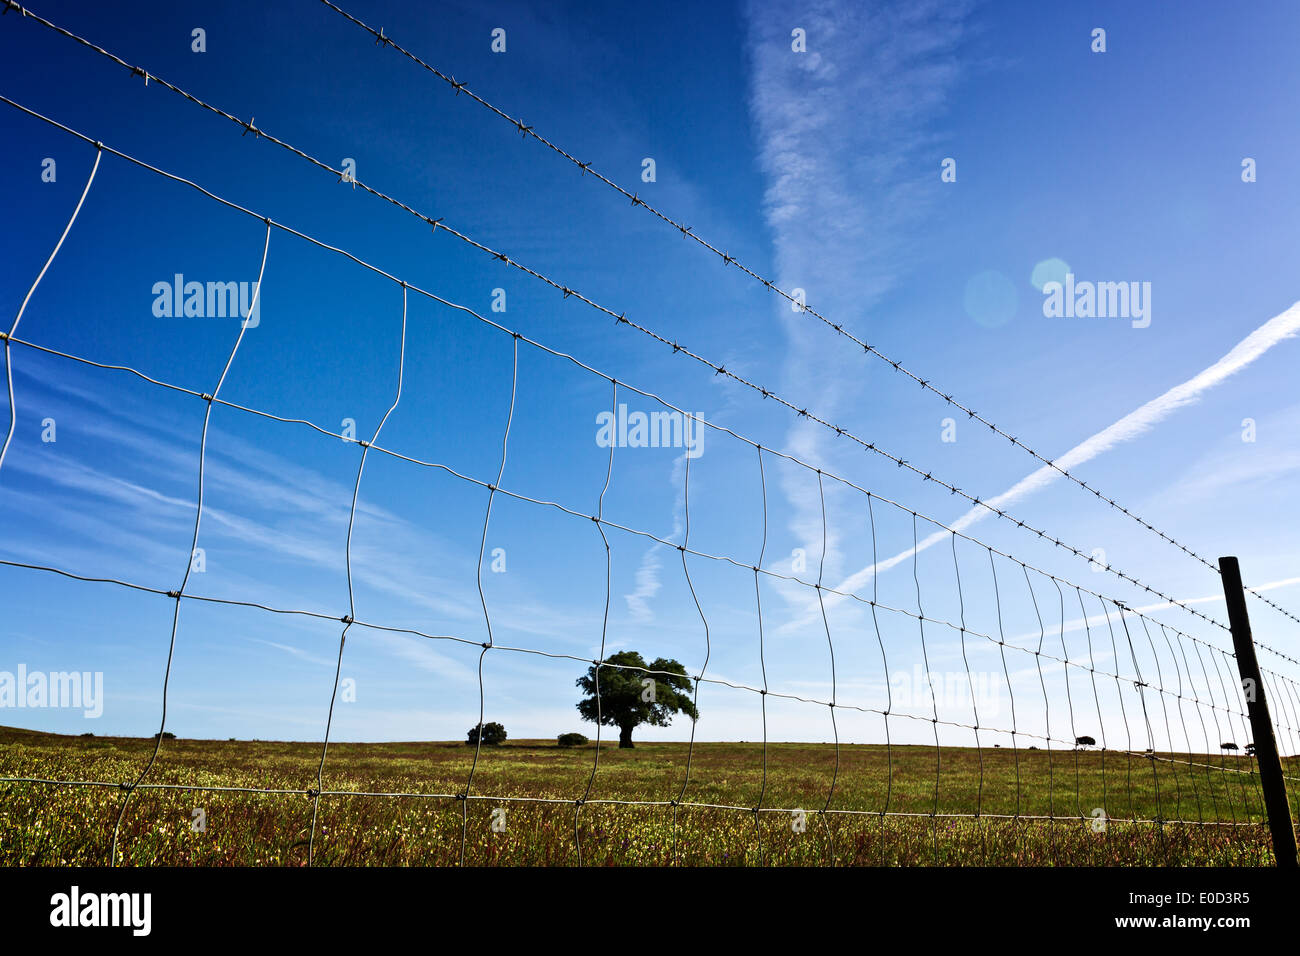 View through the barbed wire fence on the single tree in field Stock Photo